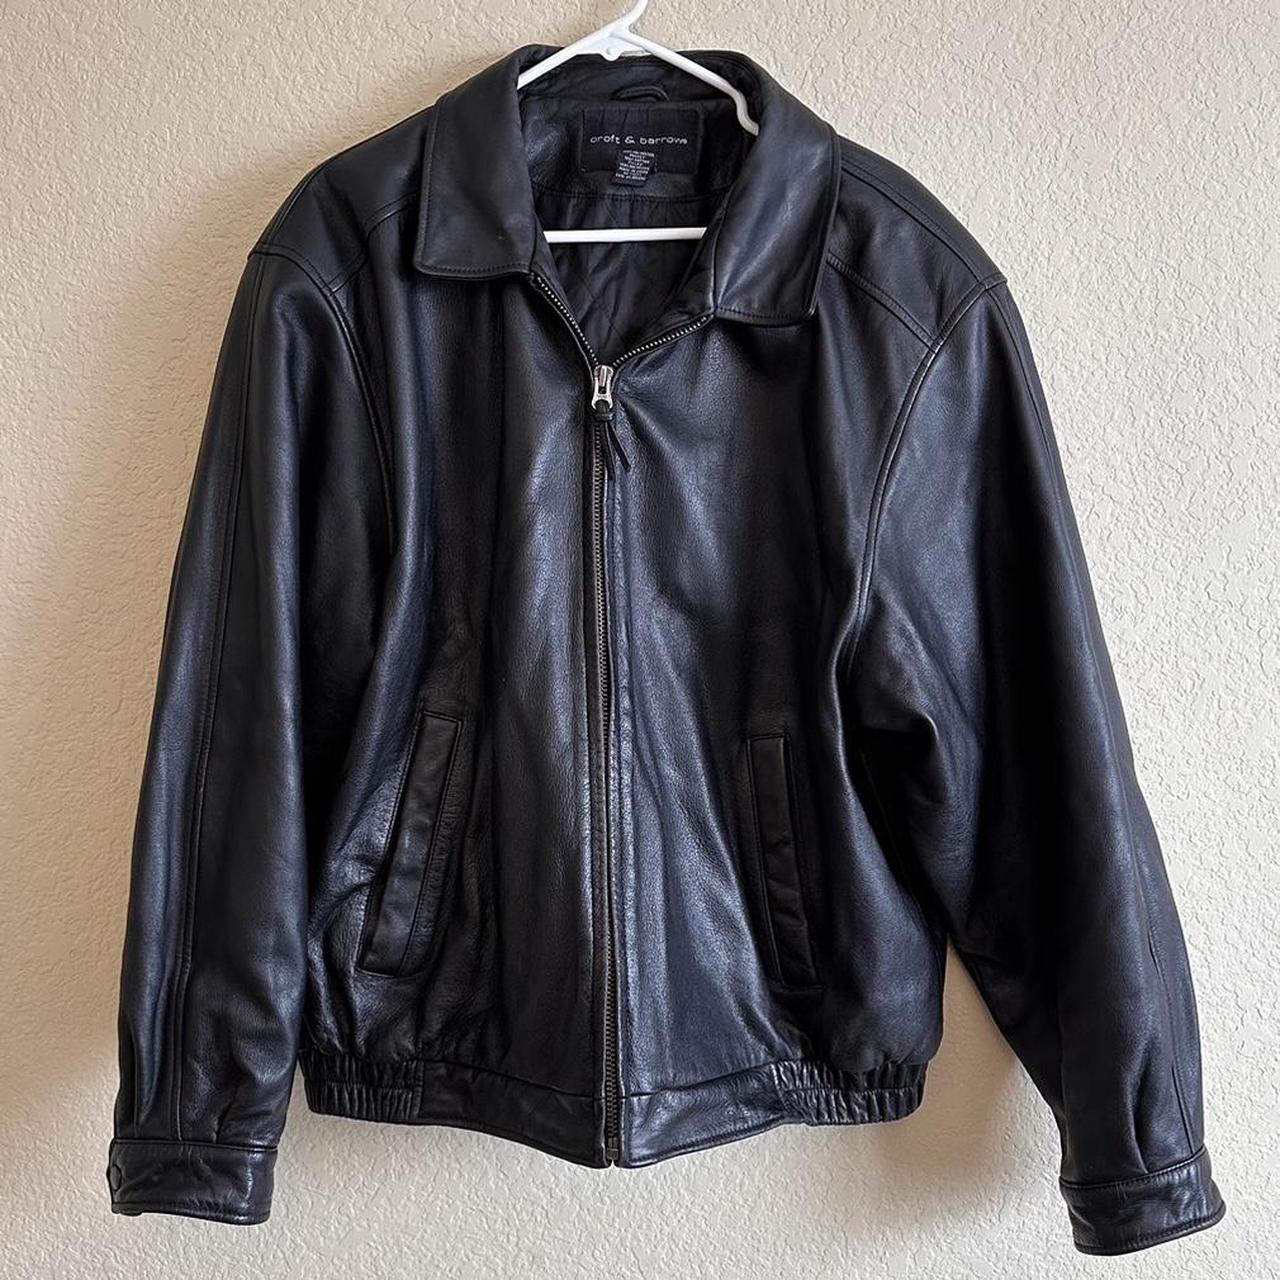 Genuine Bomber Style Leather Jacket Quilted... - Depop